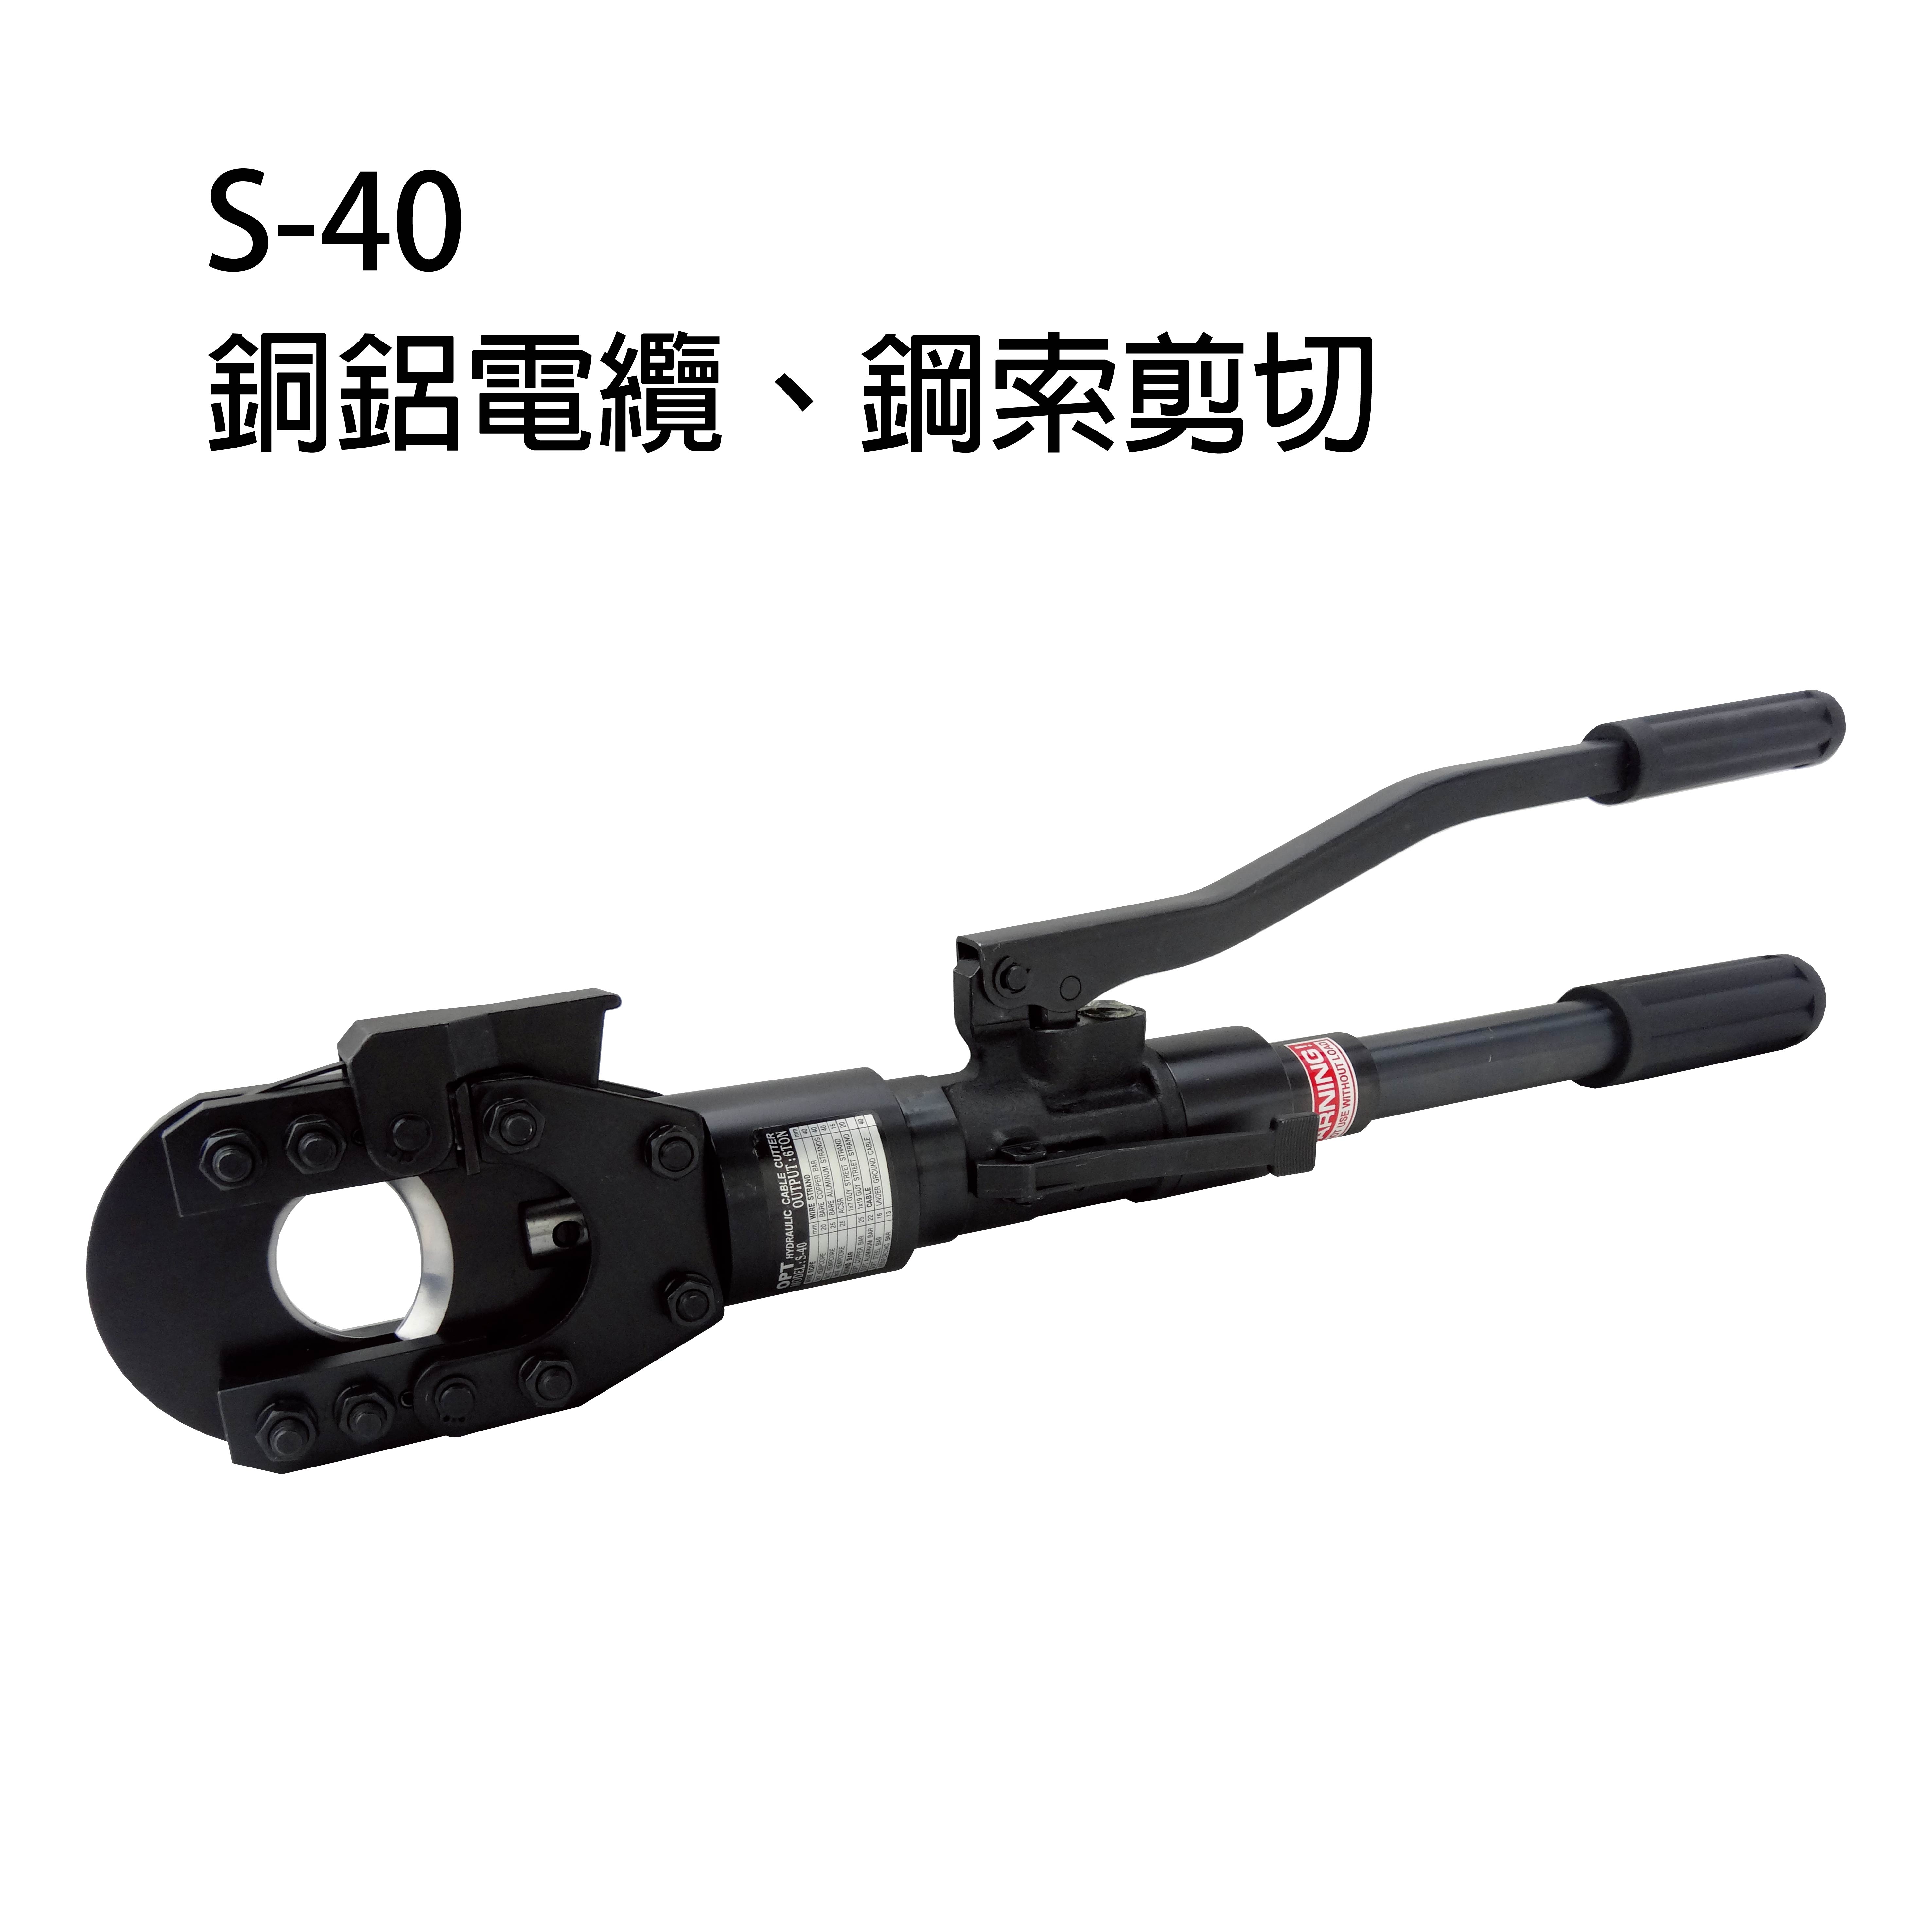 S-40 MANUAL HYDRAULIC CABLE CUTTERS